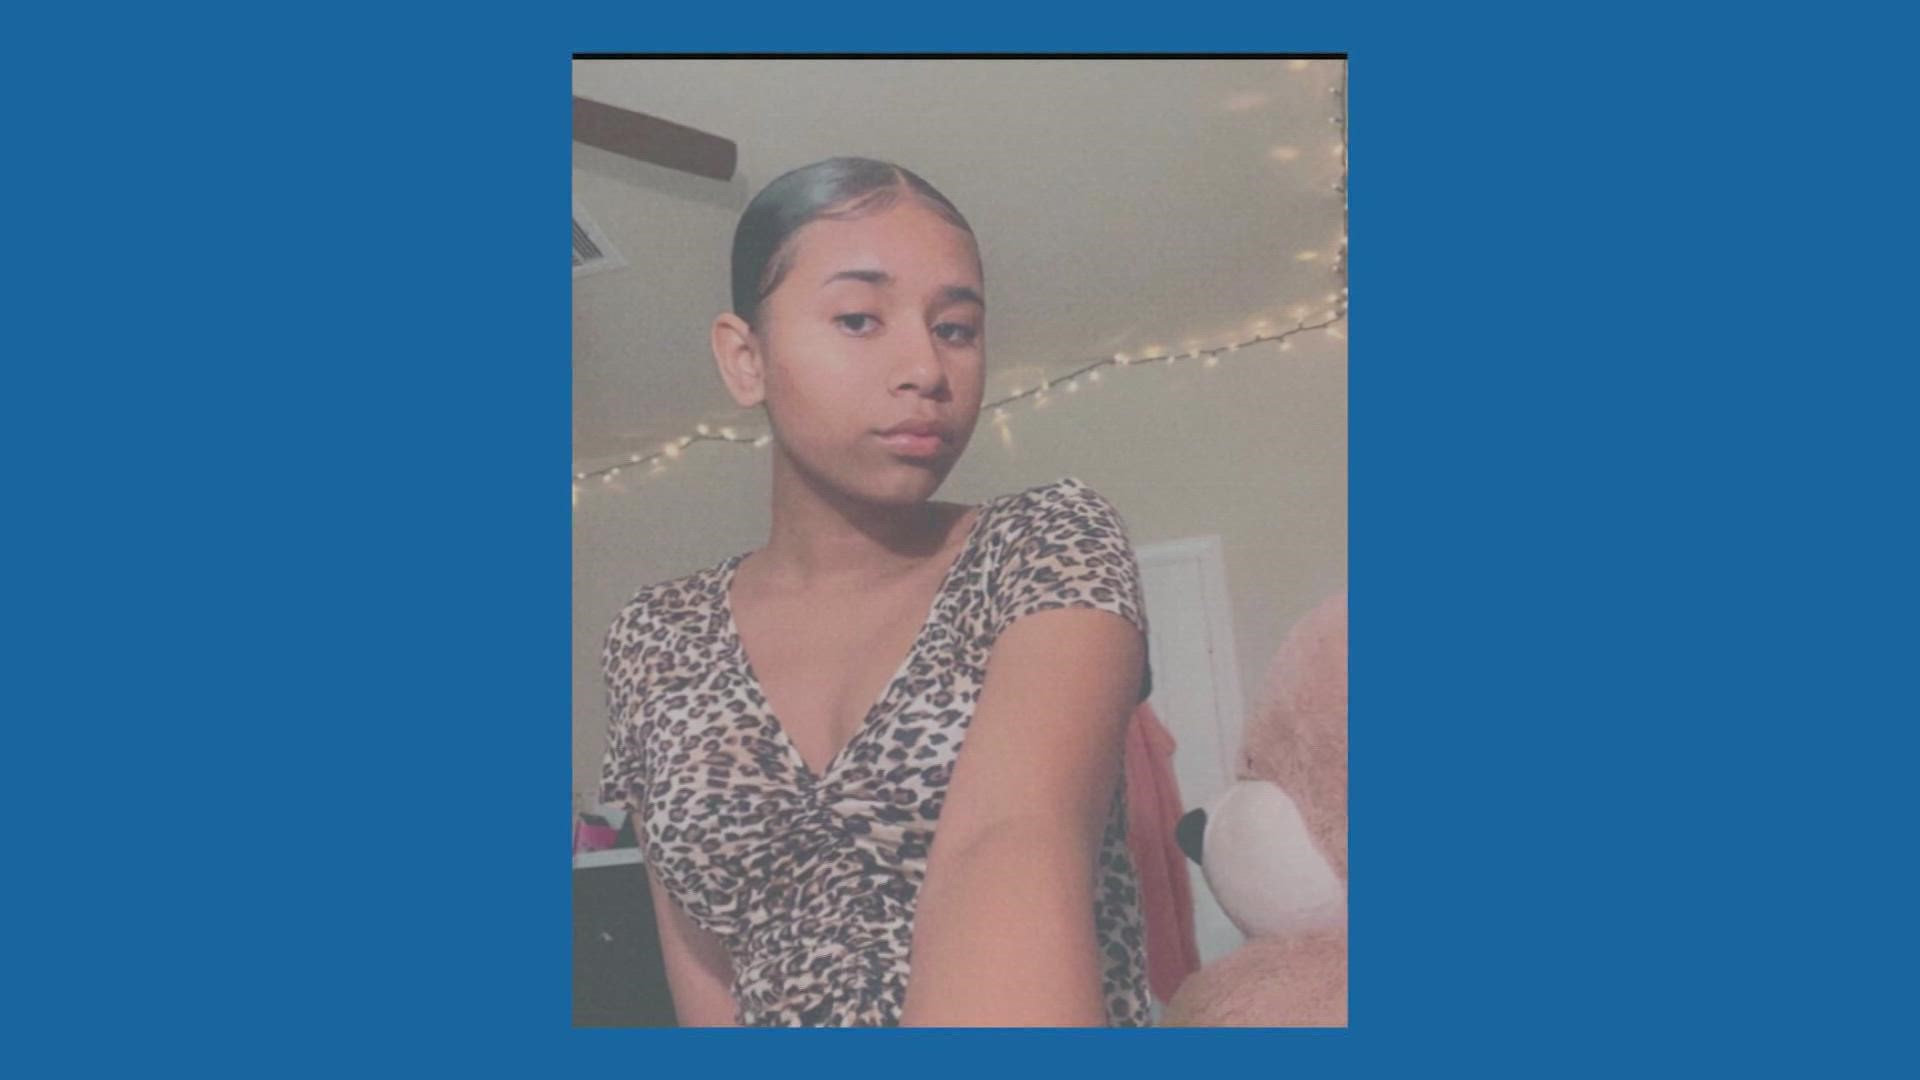 Family members have identified the victim as 16-year-old Lauren Juma. She was a sophomore at Nimitz High School.